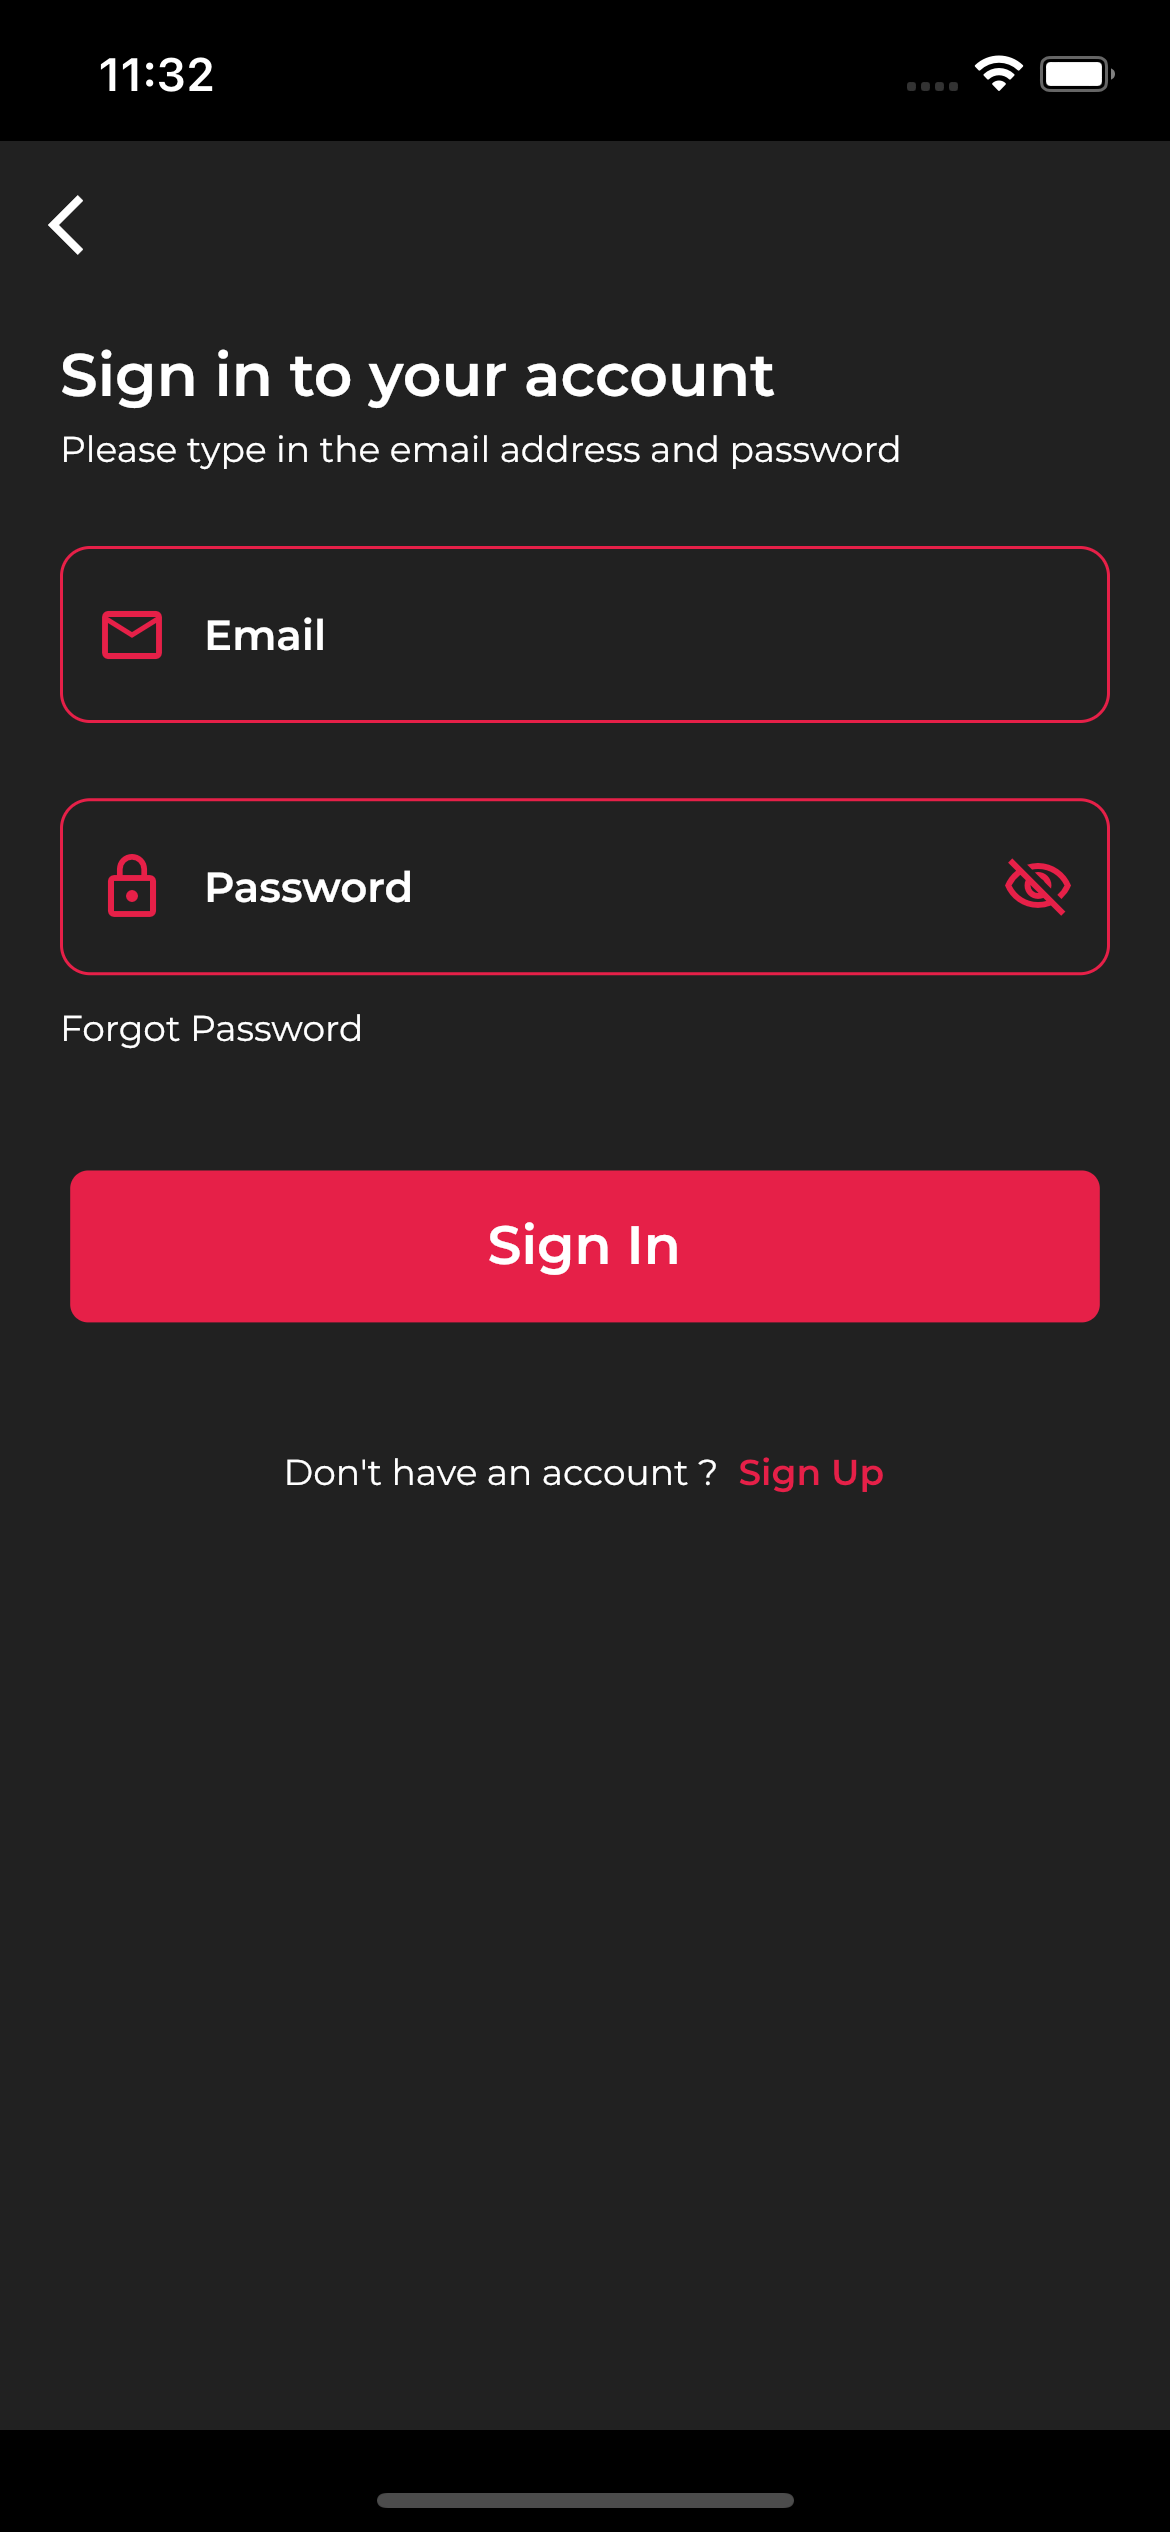 11:32 =

<

Sign in to your account

Please type in the email address and password

Q Password D

Forgot Password

Don't have an account? Sign Up